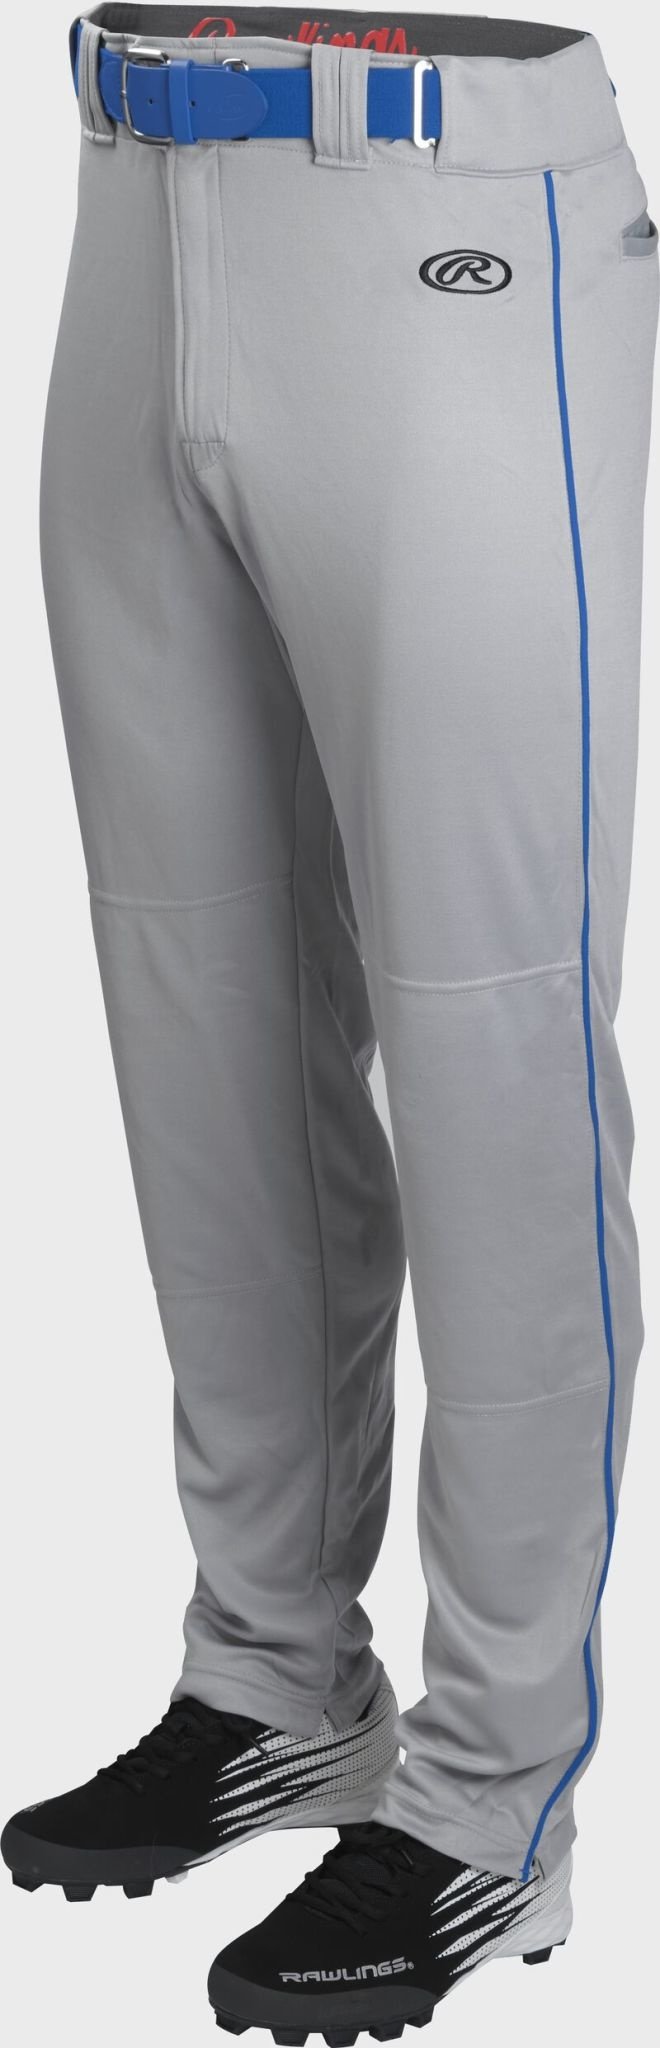 Rawlings Launch LNCHSRP semi-relaxed piped baseball pant youth